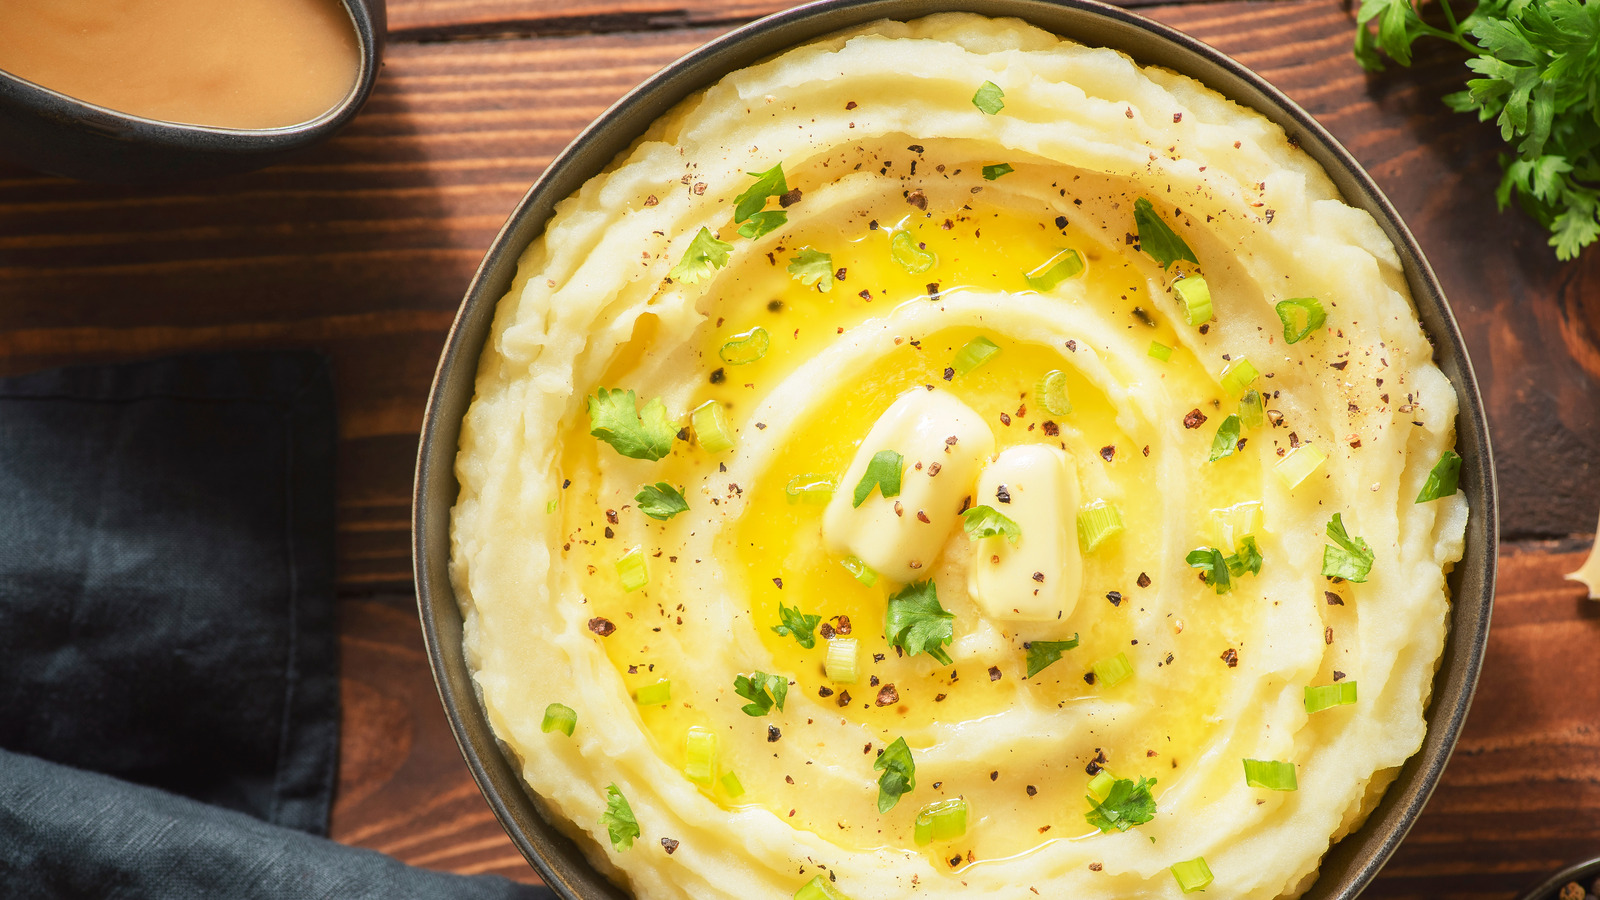 https://www.tastingtable.com/img/gallery/the-absolute-best-toppings-for-mashed-potatoes/l-intro-1656360879.jpg